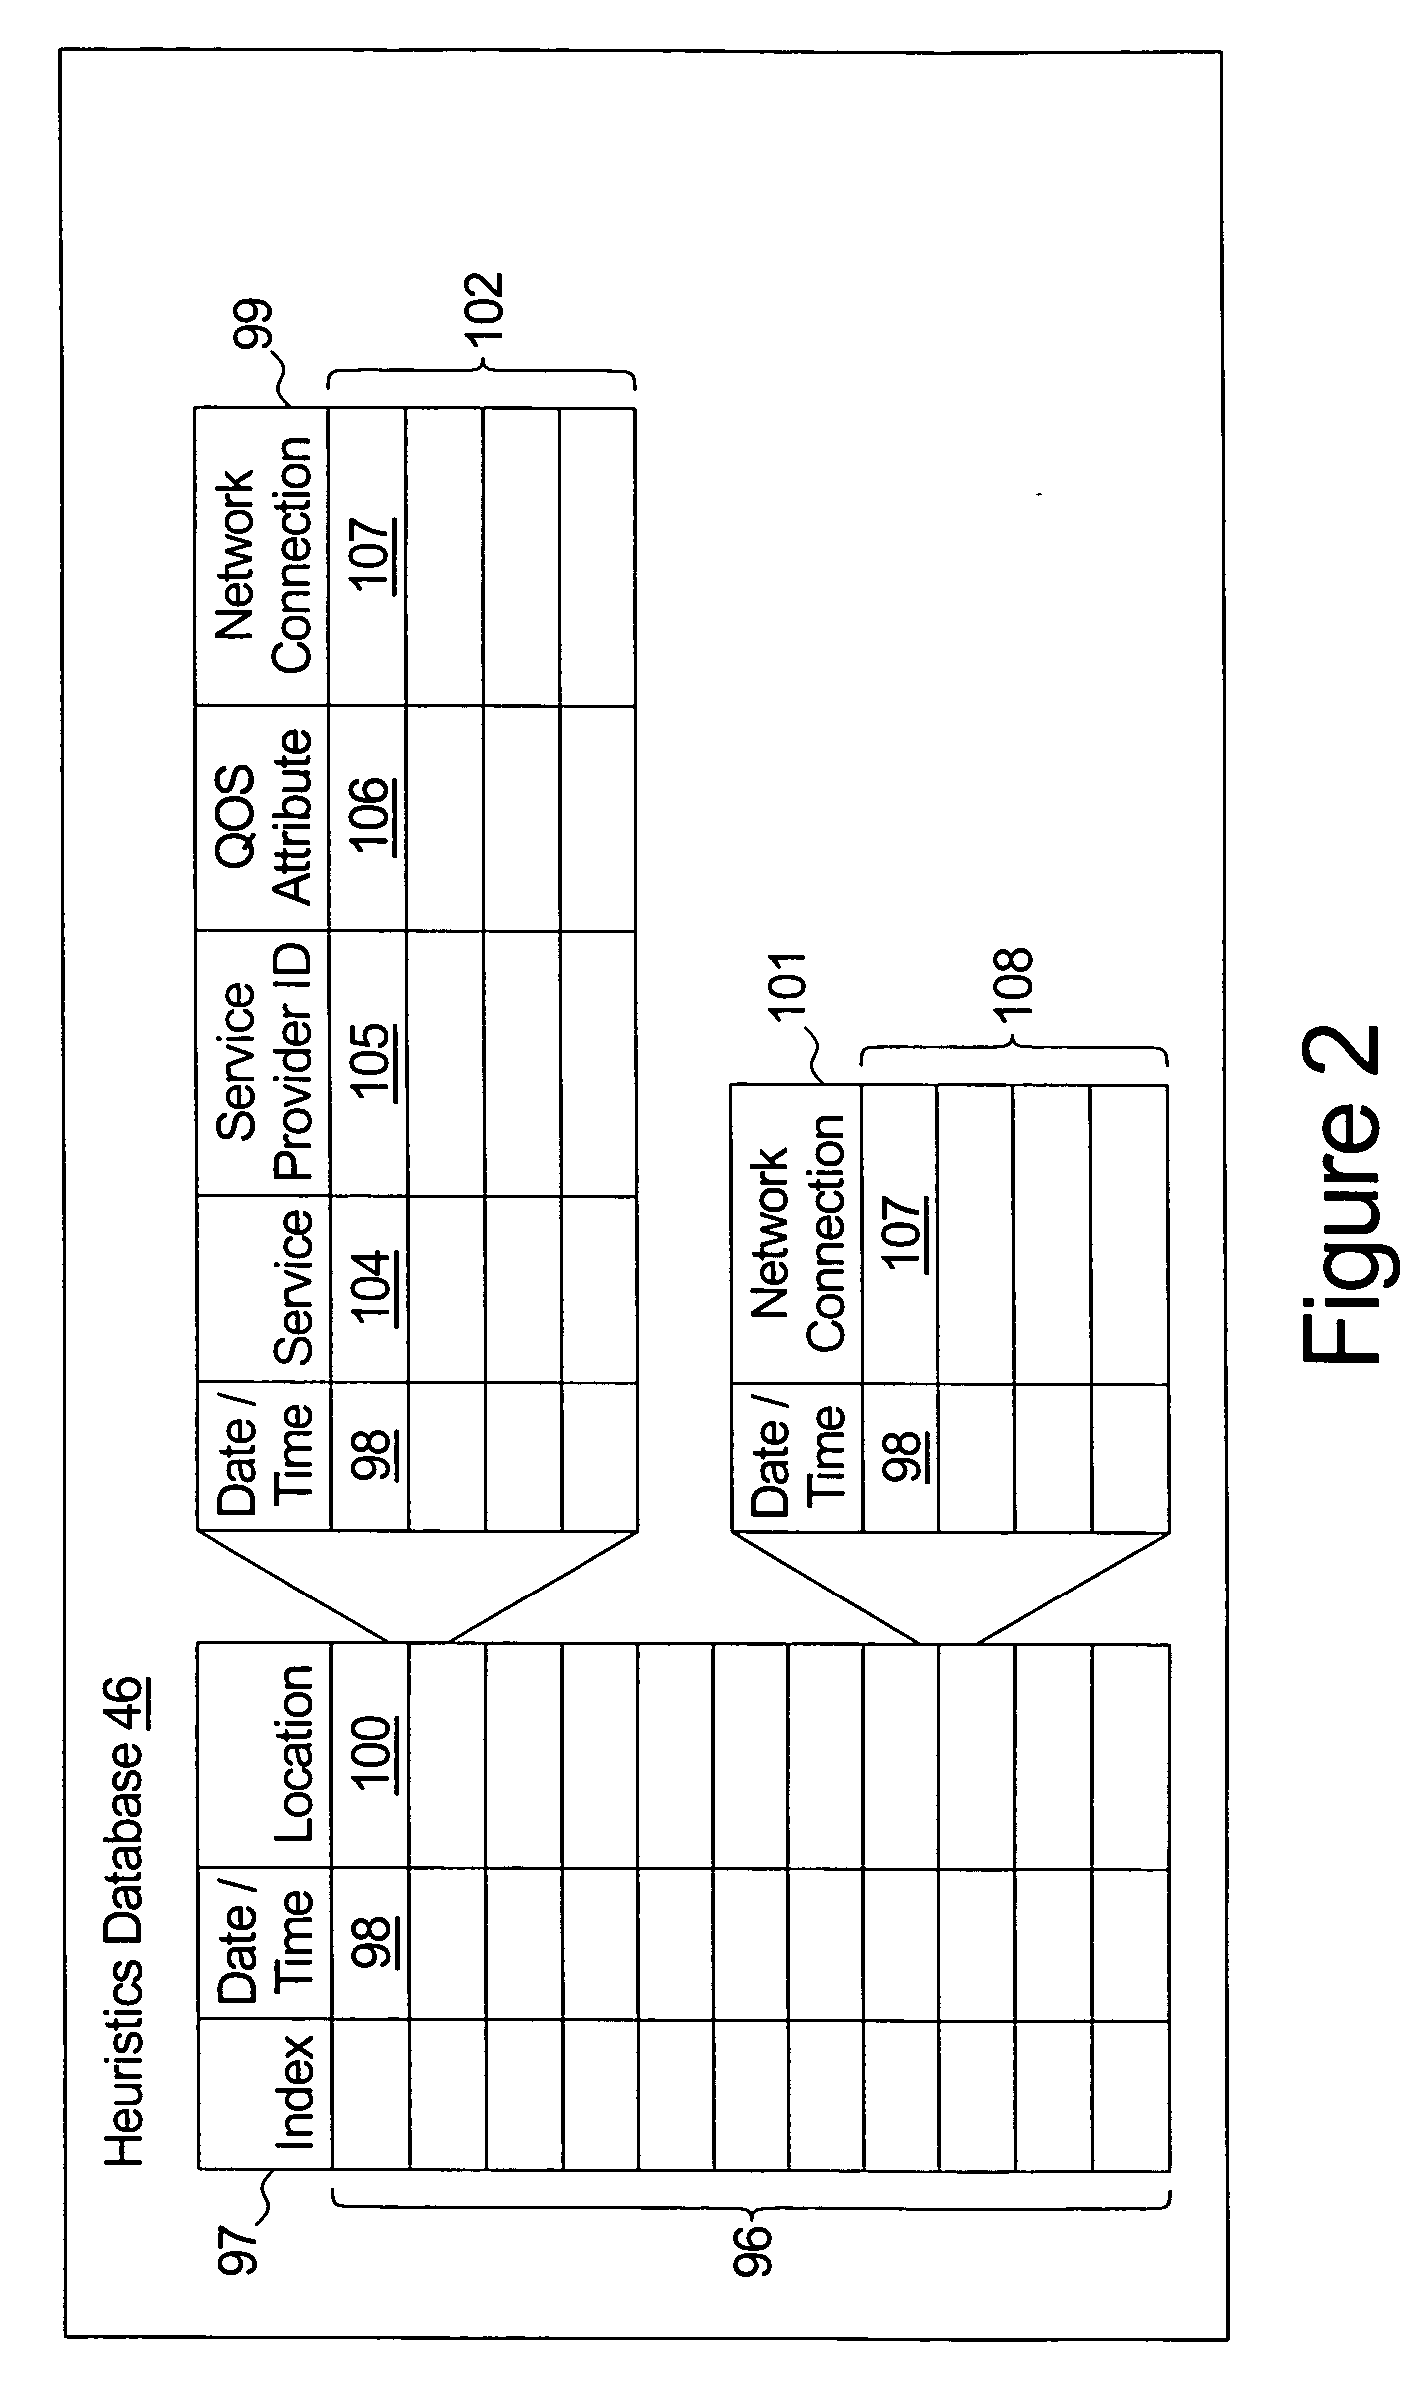 System and method for delegation of data processing tasks based on device physical attributes and spatial behavior